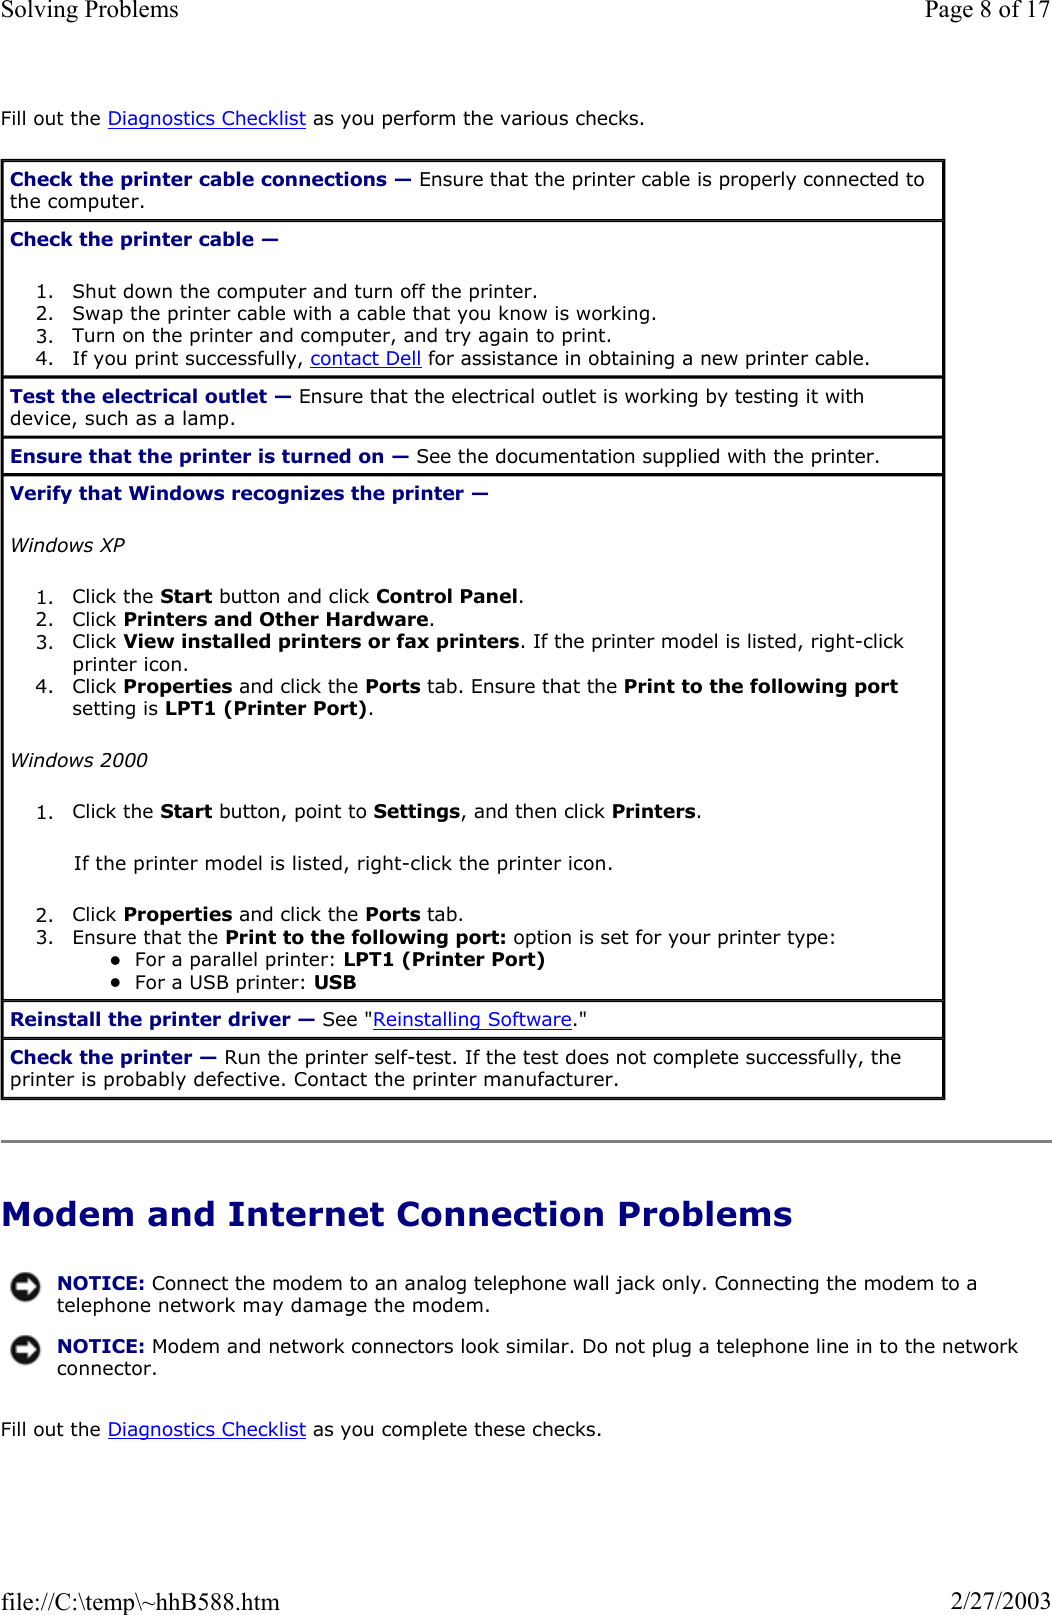 Fill out the Diagnostics Checklist as you perform the various checks. Modem and Internet Connection Problems Fill out the Diagnostics Checklist as you complete these checks. Check the printer cable connections — Ensure that the printer cable is properly connected to the computer. Check the printer cable —1. Shut down the computer and turn off the printer.  2. Swap the printer cable with a cable that you know is working.  3. Turn on the printer and computer, and try again to print.  4. If you print successfully, contact Dell for assistance in obtaining a new printer cable.  Test the electrical outlet — Ensure that the electrical outlet is working by testing it with device, such as a lamp. Ensure that the printer is turned on — See the documentation supplied with the printer. Verify that Windows recognizes the printer —Windows XP1. Click the Start button and click Control Panel.2. Click Printers and Other Hardware.3. Click View installed printers or fax printers. If the printer model is listed, right-click printer icon.4. Click Properties and click the Ports tab. Ensure that the Print to the following portsetting is LPT1 (Printer Port).Windows 20001. Click the Start button, point to Settings, and then click Printers.If the printer model is listed, right-click the printer icon. 2. Click Properties and click the Ports tab.  3. Ensure that the Print to the following port: option is set for your printer type: zFor a parallel printer: LPT1 (Printer Port)zFor a USB printer: USBReinstall the printer driver — See &quot;Reinstalling Software.&quot; Check the printer — Run the printer self-test. If the test does not complete successfully, the printer is probably defective. Contact the printer manufacturer. NOTICE: Connect the modem to an analog telephone wall jack only. Connecting the modem to a telephone network may damage the modem.NOTICE: Modem and network connectors look similar. Do not plug a telephone line in to the network connector.Page 8 of 17Solving Problems2/27/2003file://C:\temp\~hhB588.htm